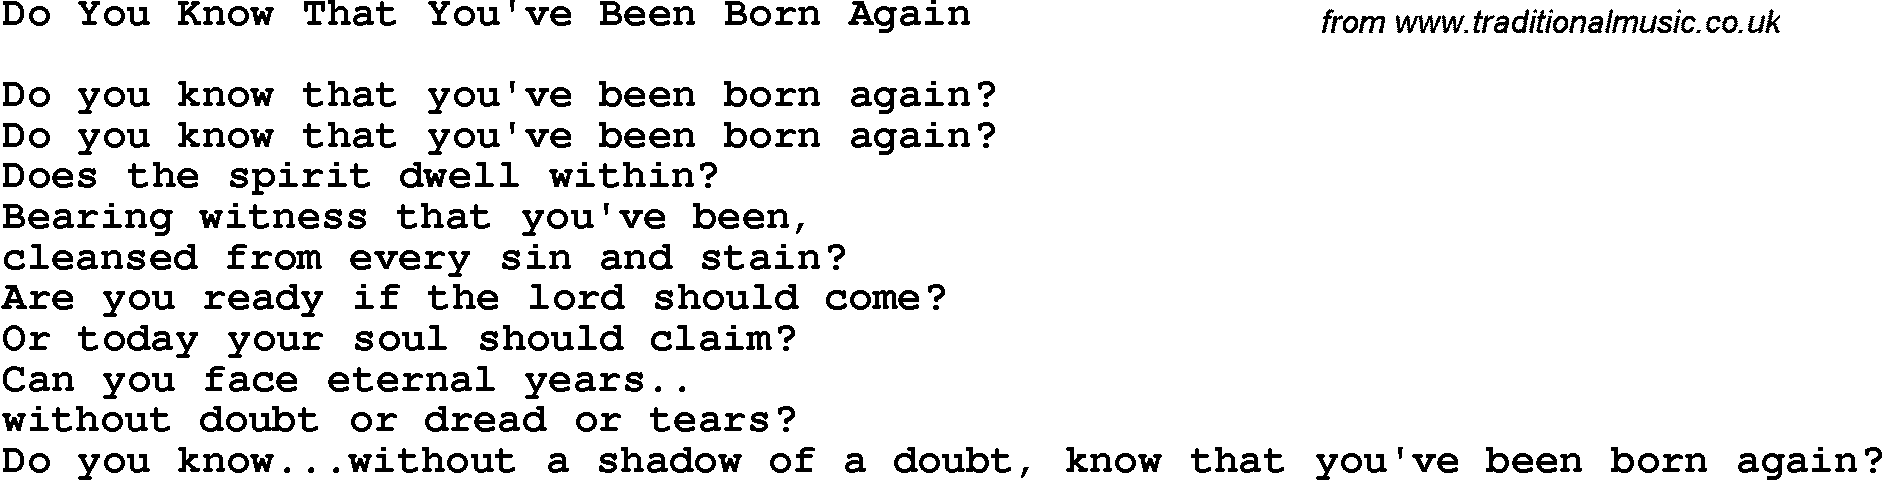 Country, Southern and Bluegrass Gospel Song Do You Know That You've Been Born Again lyrics 